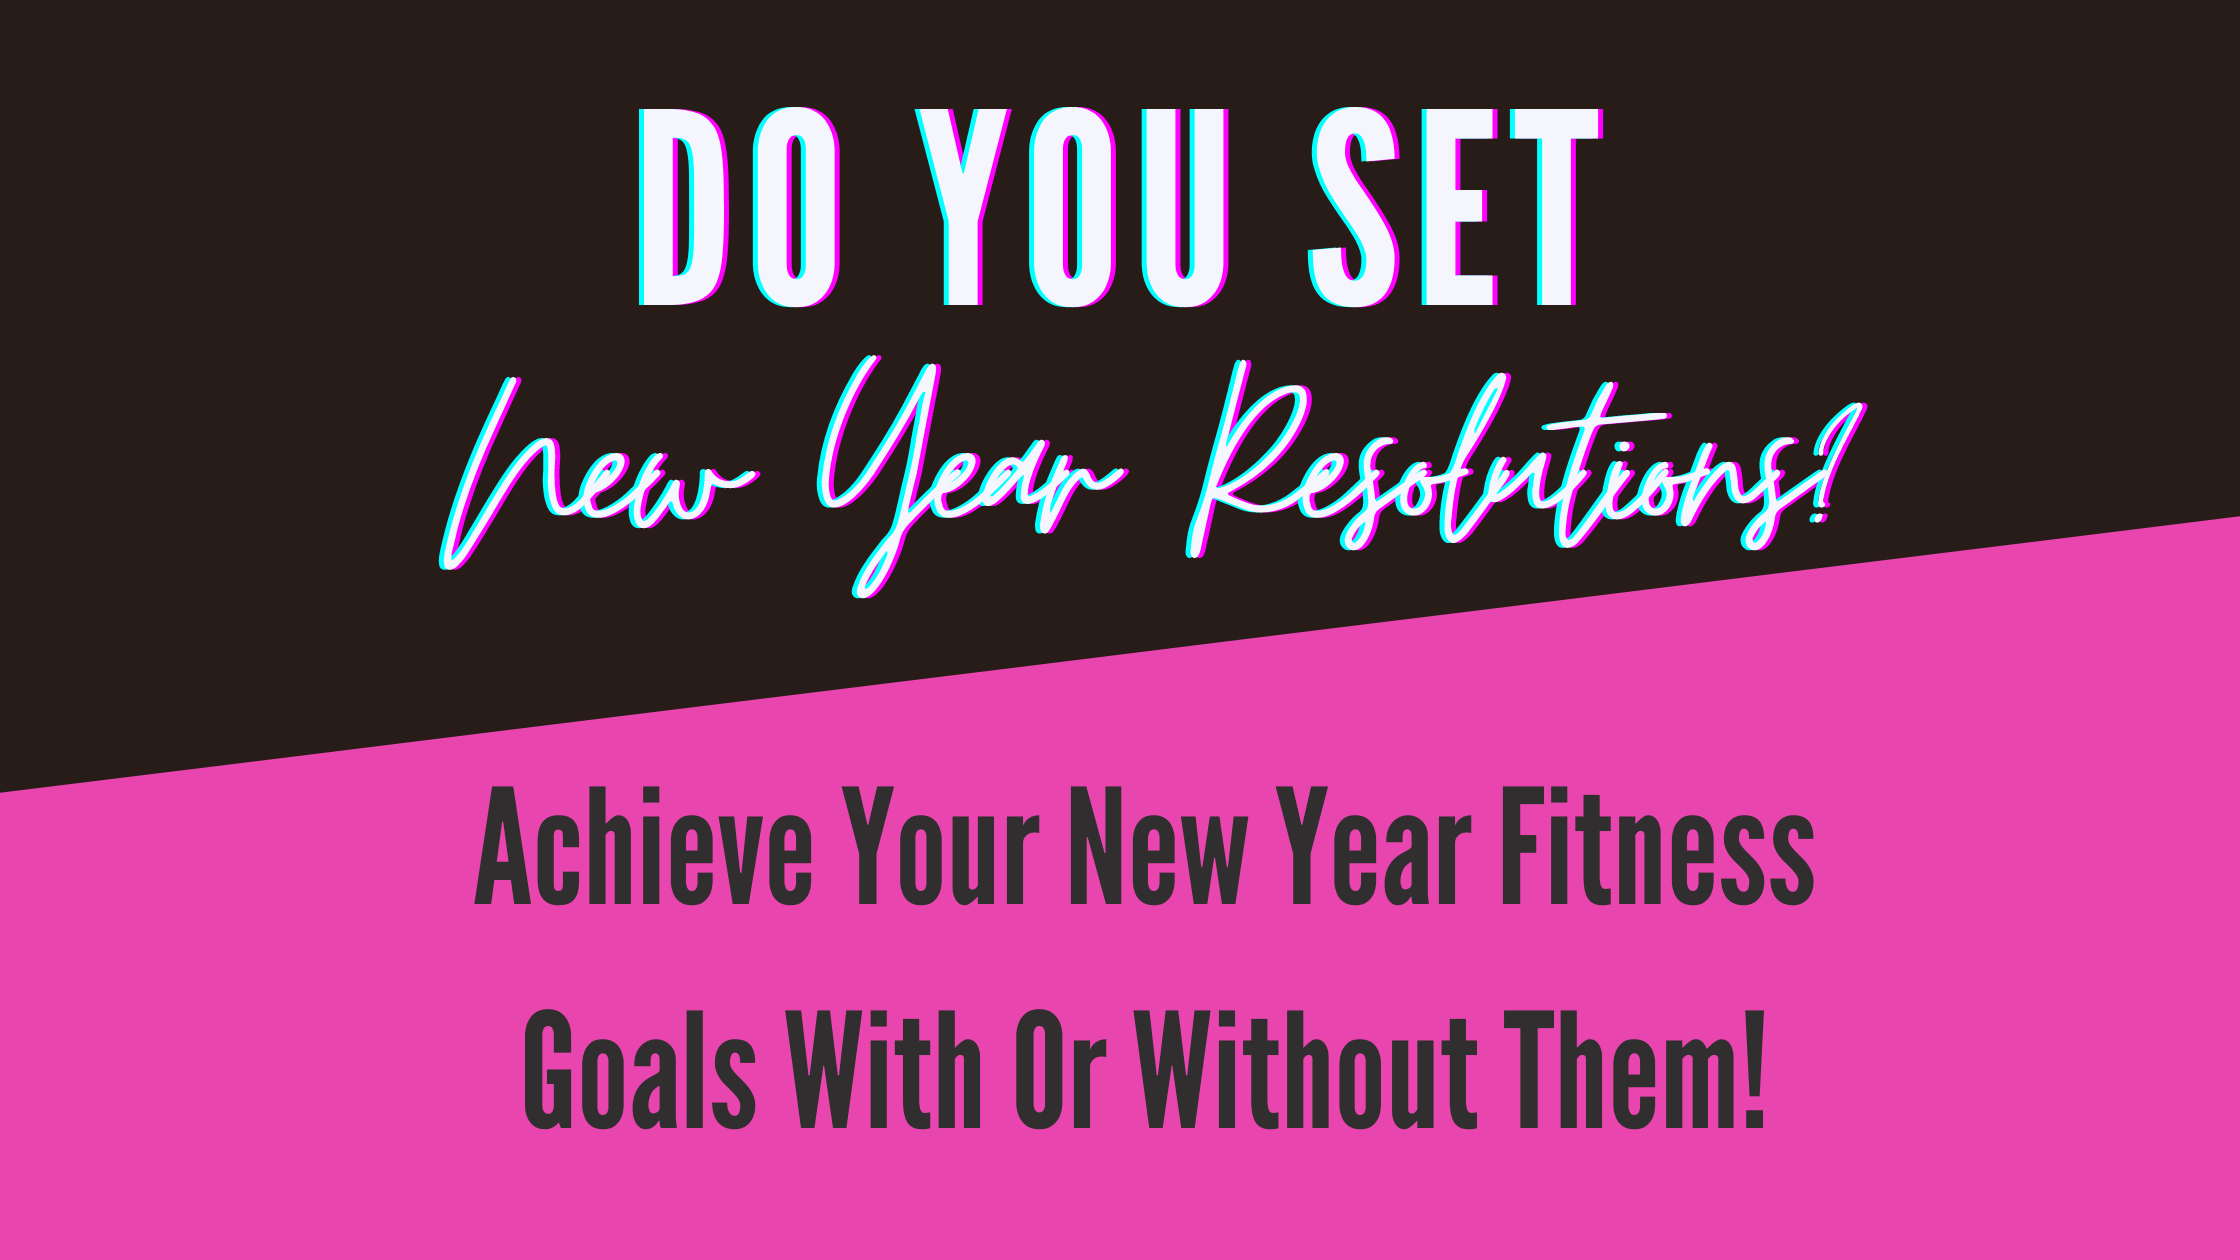 Do You Set New Year Resolutions?  Achieve Your New Year Fitness Goals With Or Without Them!